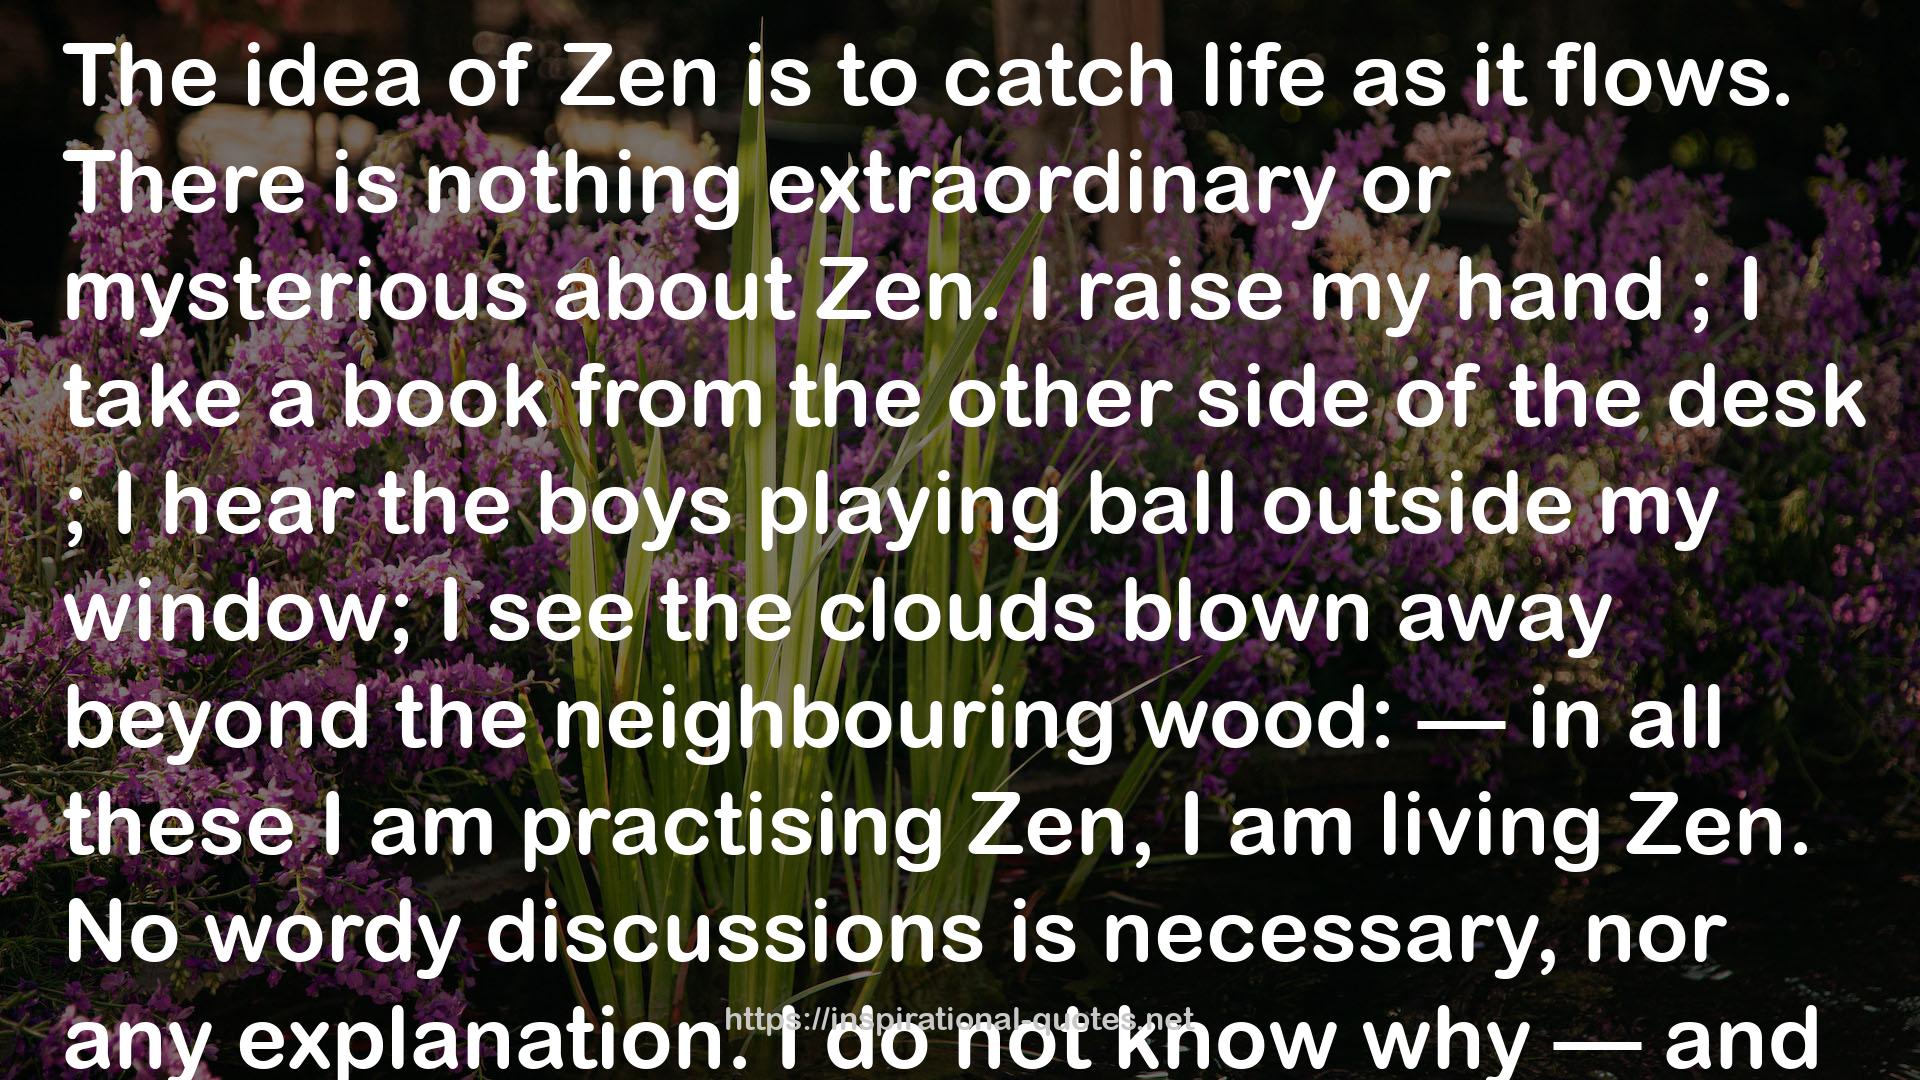 An Introduction to Zen Buddhism QUOTES